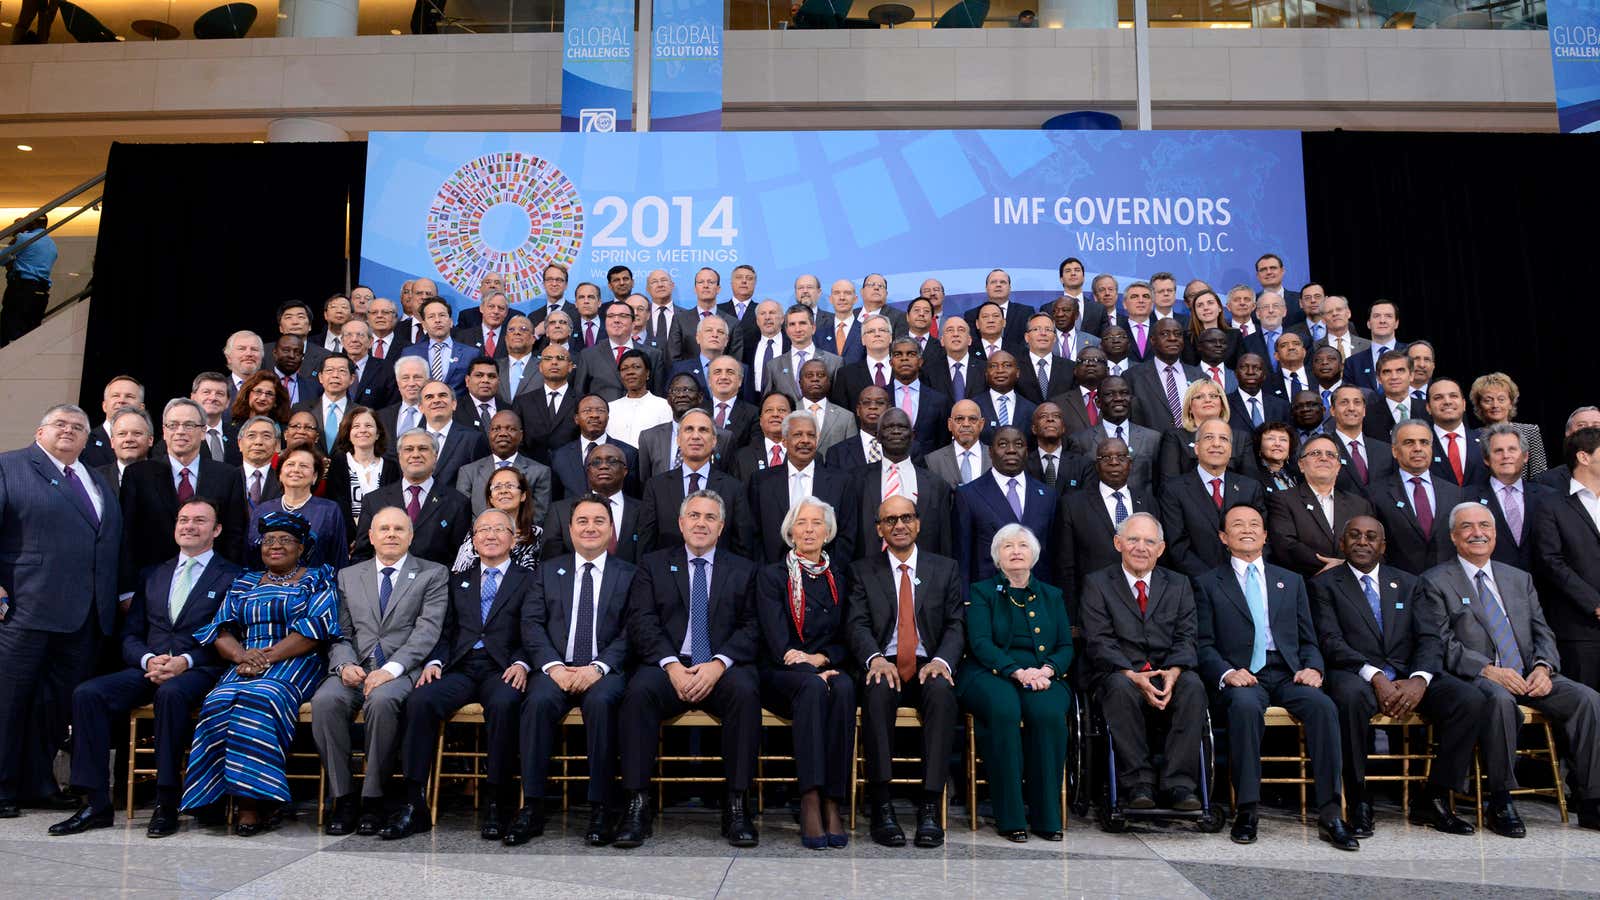 A lot of men, only a few women, at the IMF and World Bank’s 2014 Annual Spring Meetings.